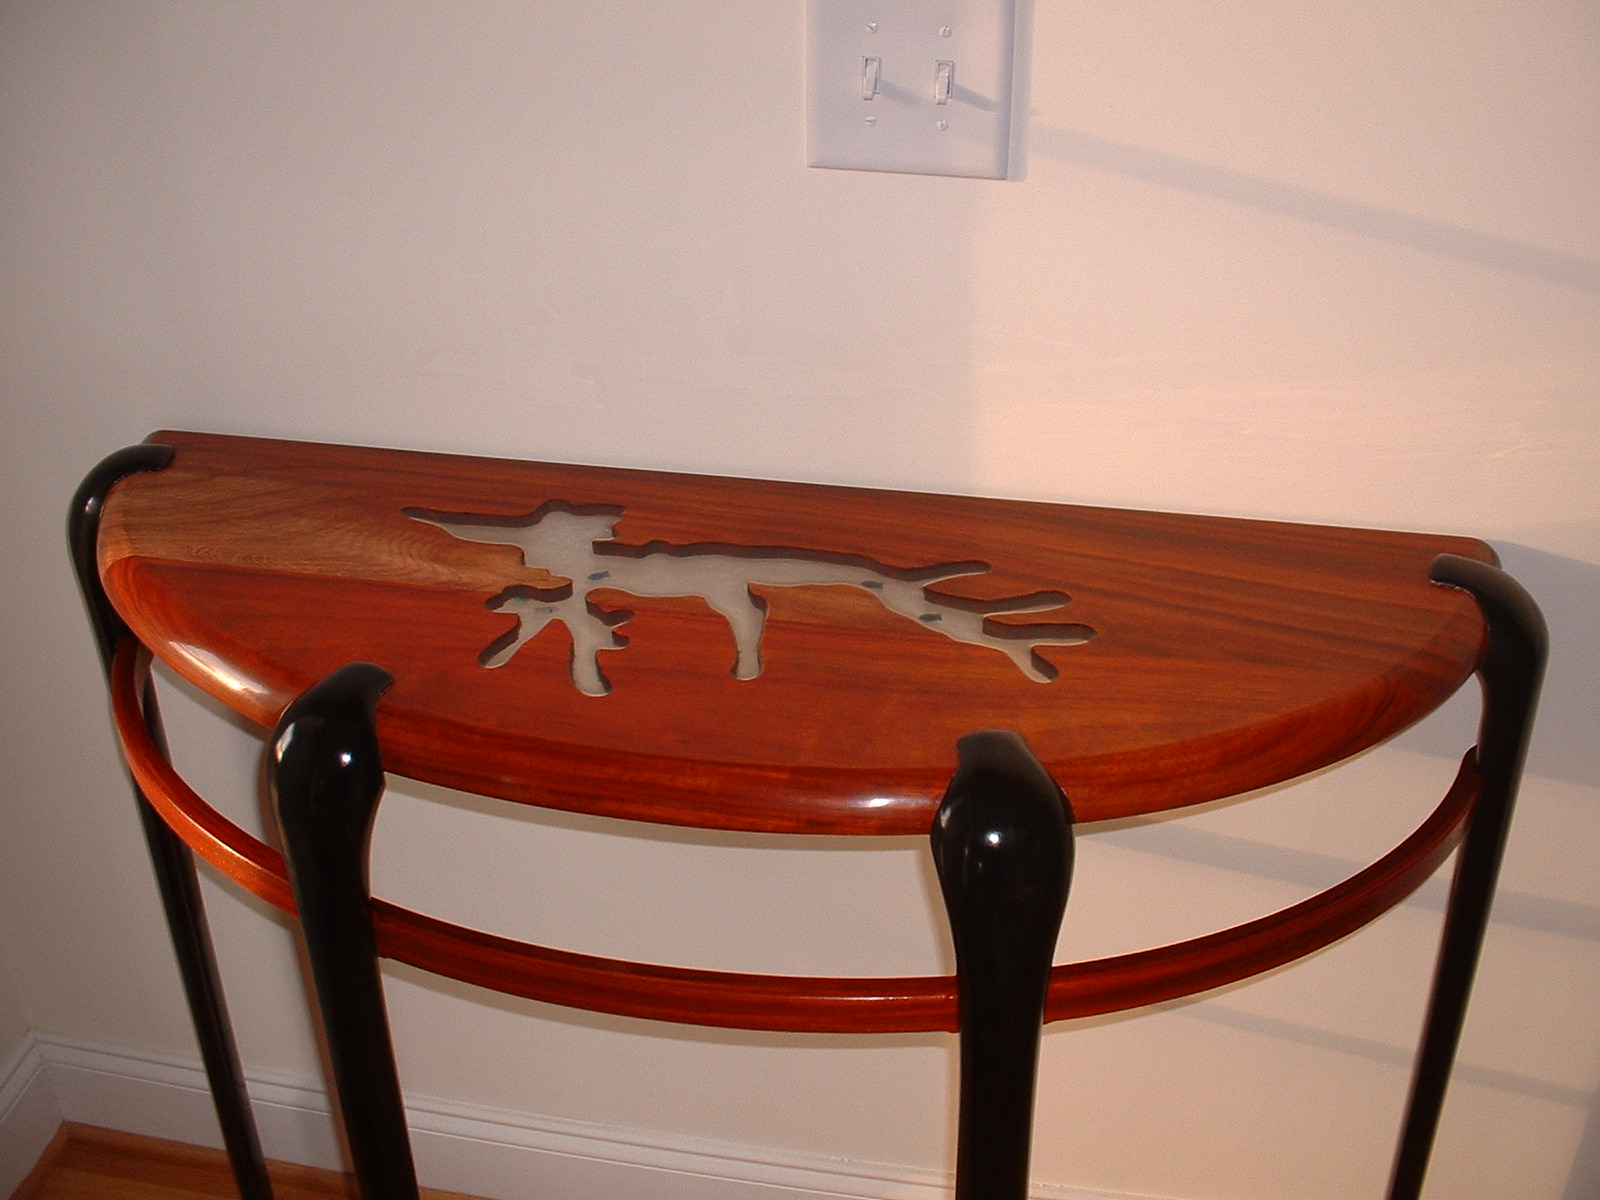 Demilune table finished